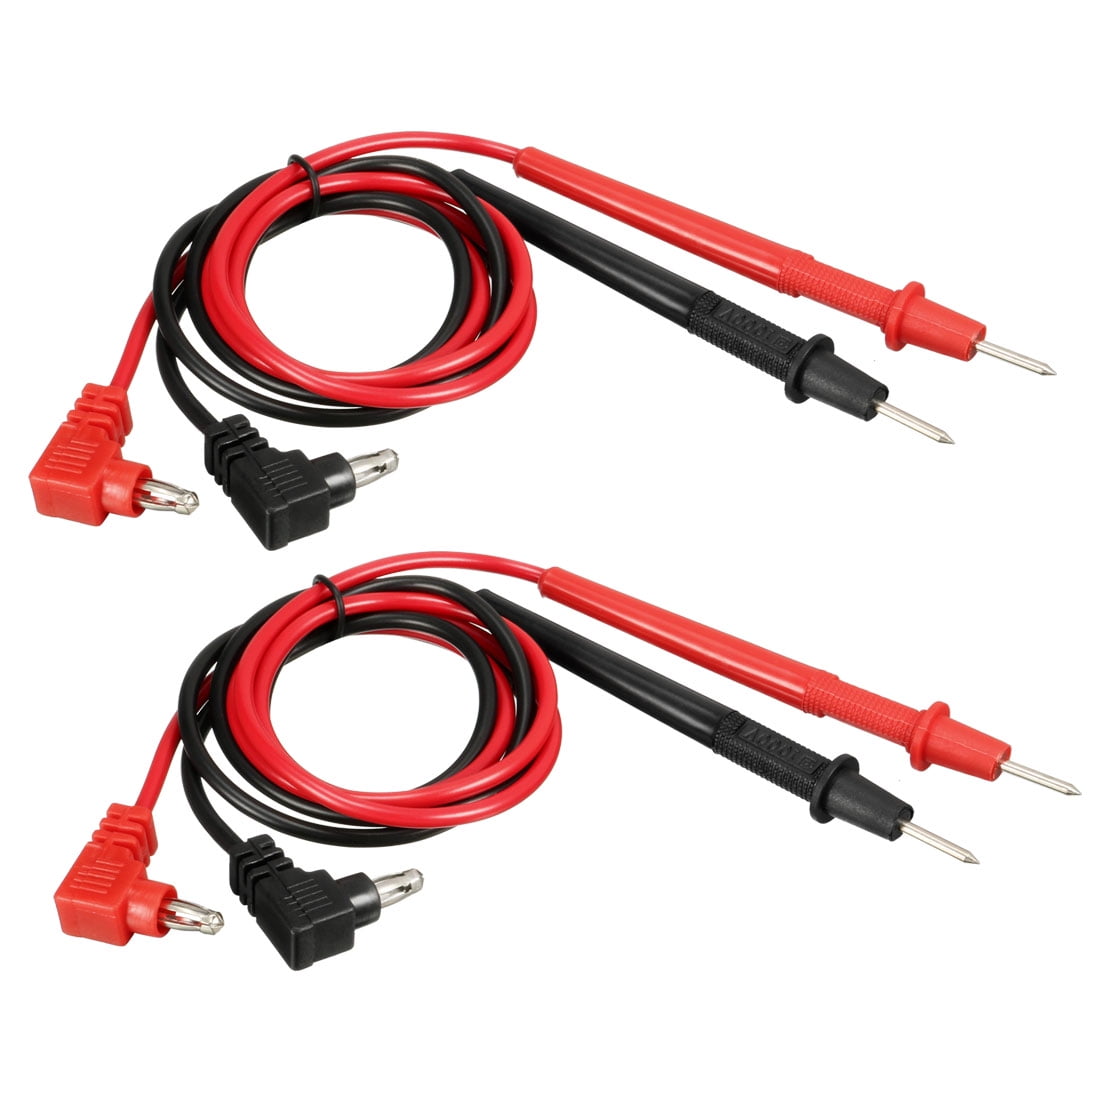 Pack of 20 4mm Banana to Banana Plug Test Cable Lead for Multimeter 5 Colors 